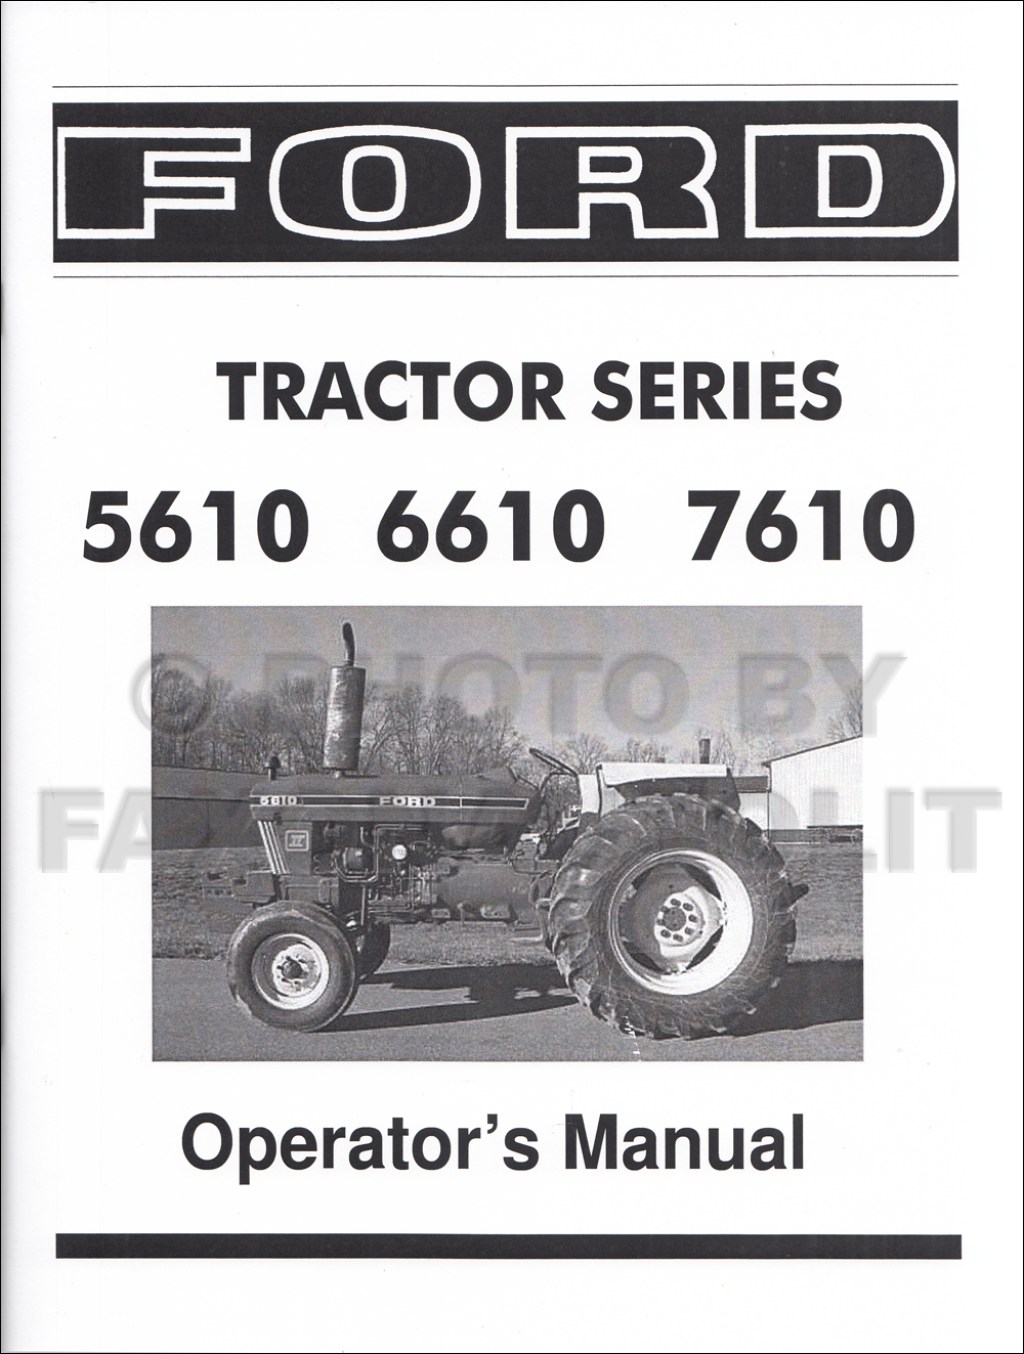 Picture of: – Ford Tractor Owners Manual Reprint